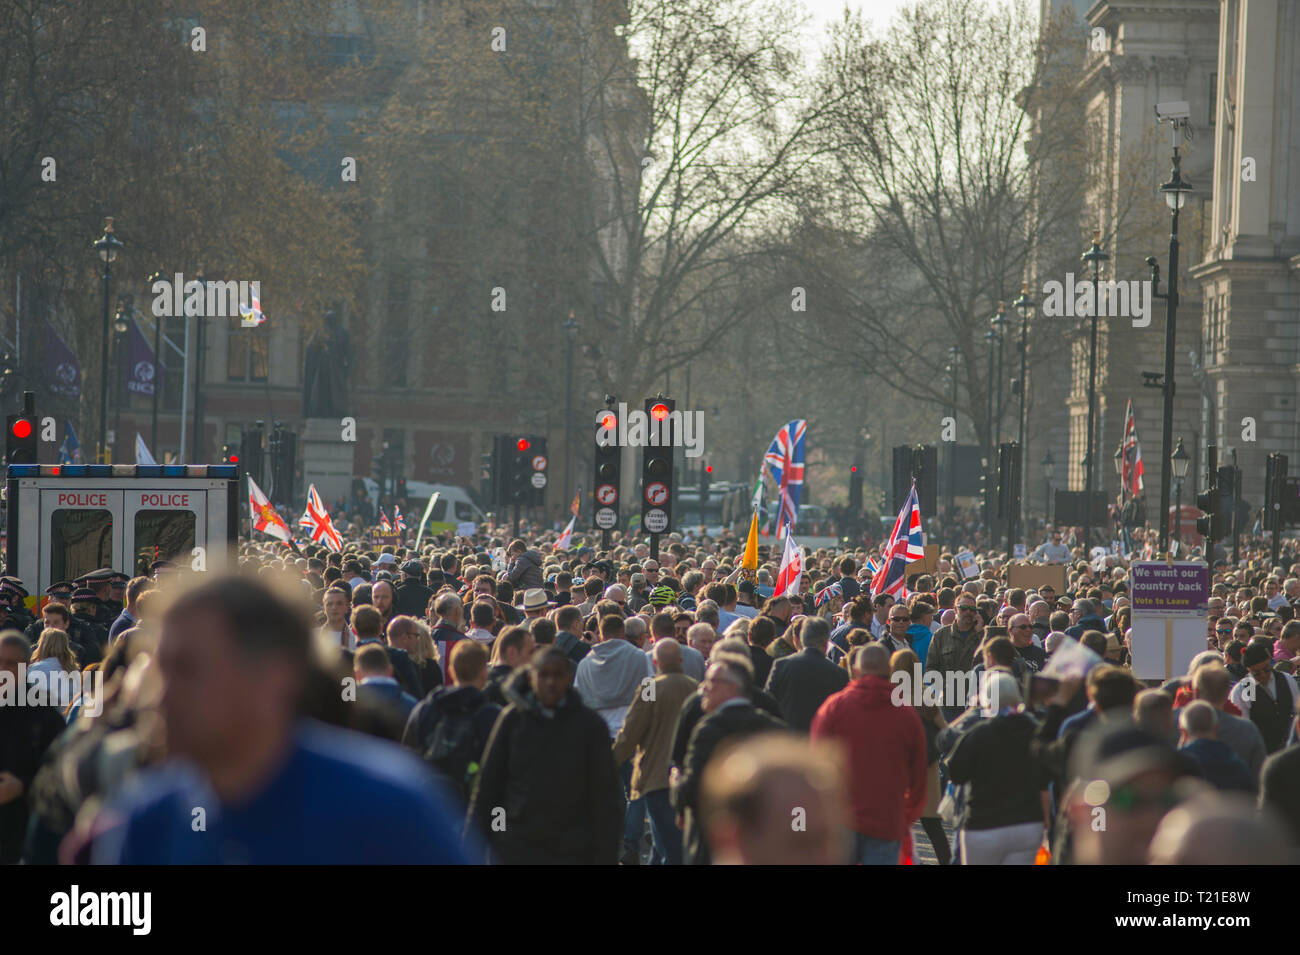 Westminster London, UK. 29 March, 2019. Thousands of Leave supporters gather outside Parliament as MPs reject the Prime Minister’s withdrawal deal by 58 votes. March to Leave rally gathers in Parliament Square to hear Nigel Farage speak. A separate Make Brexit Happen rally takes place in Whitehall, organised by UKIP with EDL’s Tommy Robinson. Image: Crowds on Bridge Street looking towards Parliament Square. Credit: Malcolm Park/Alamy Live News. Stock Photo